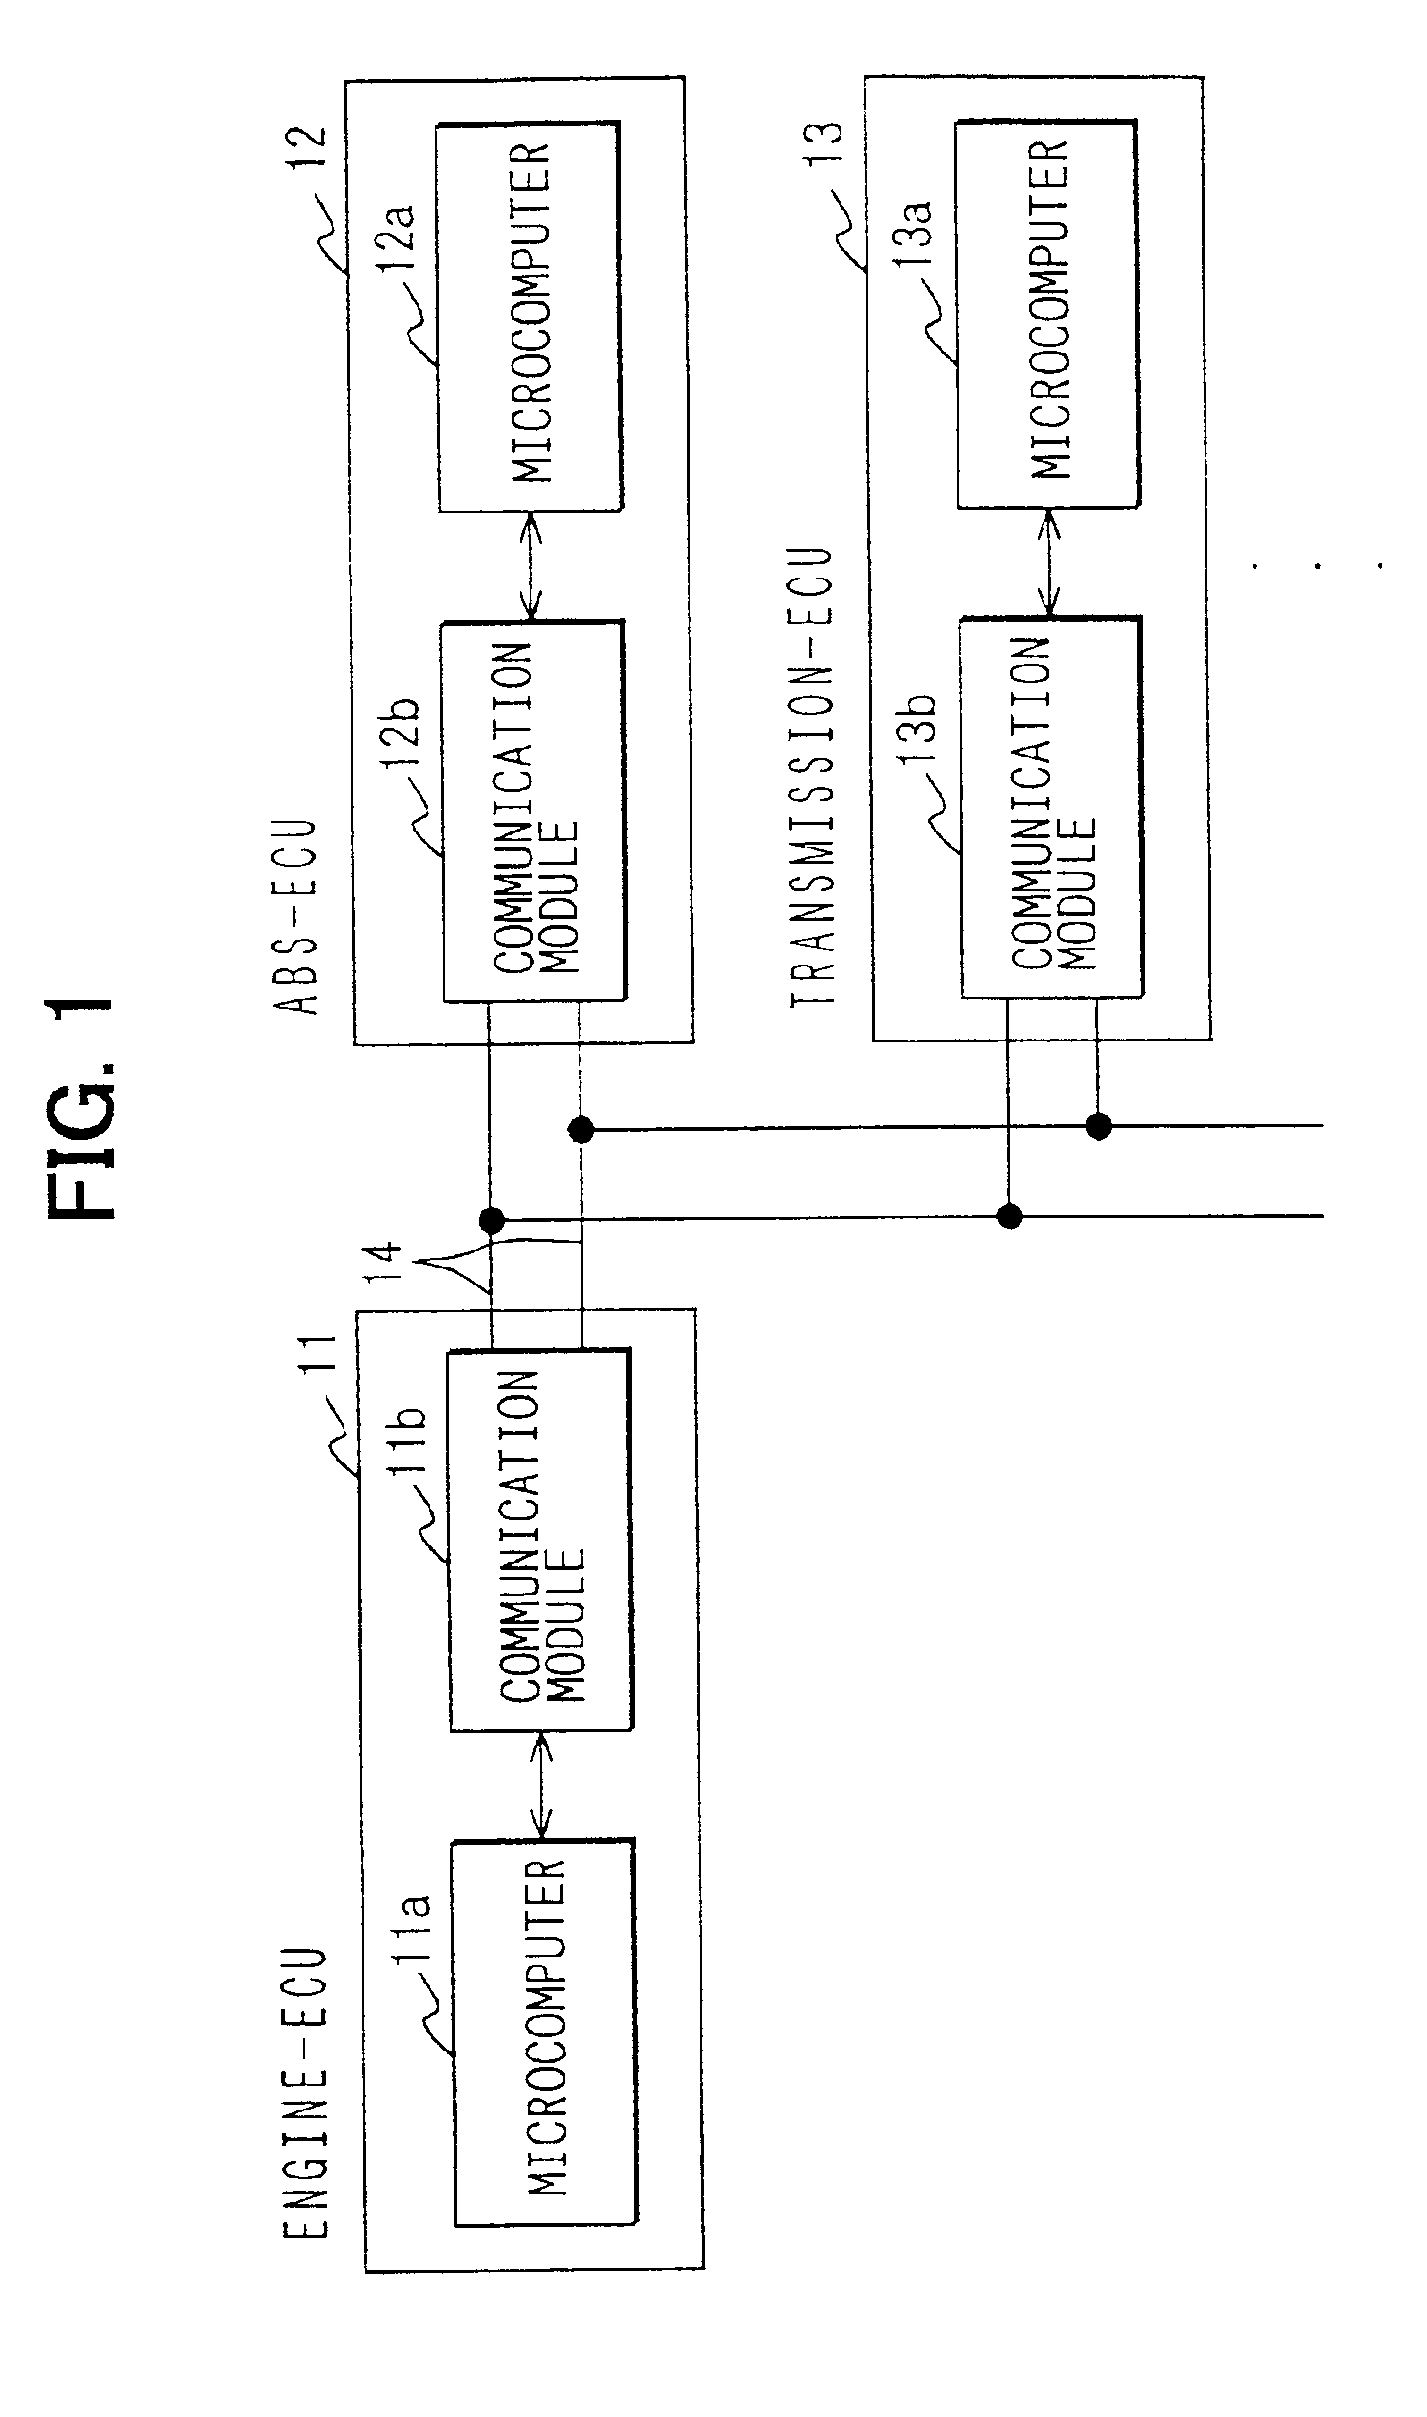 Failure detector for communication network in automobile